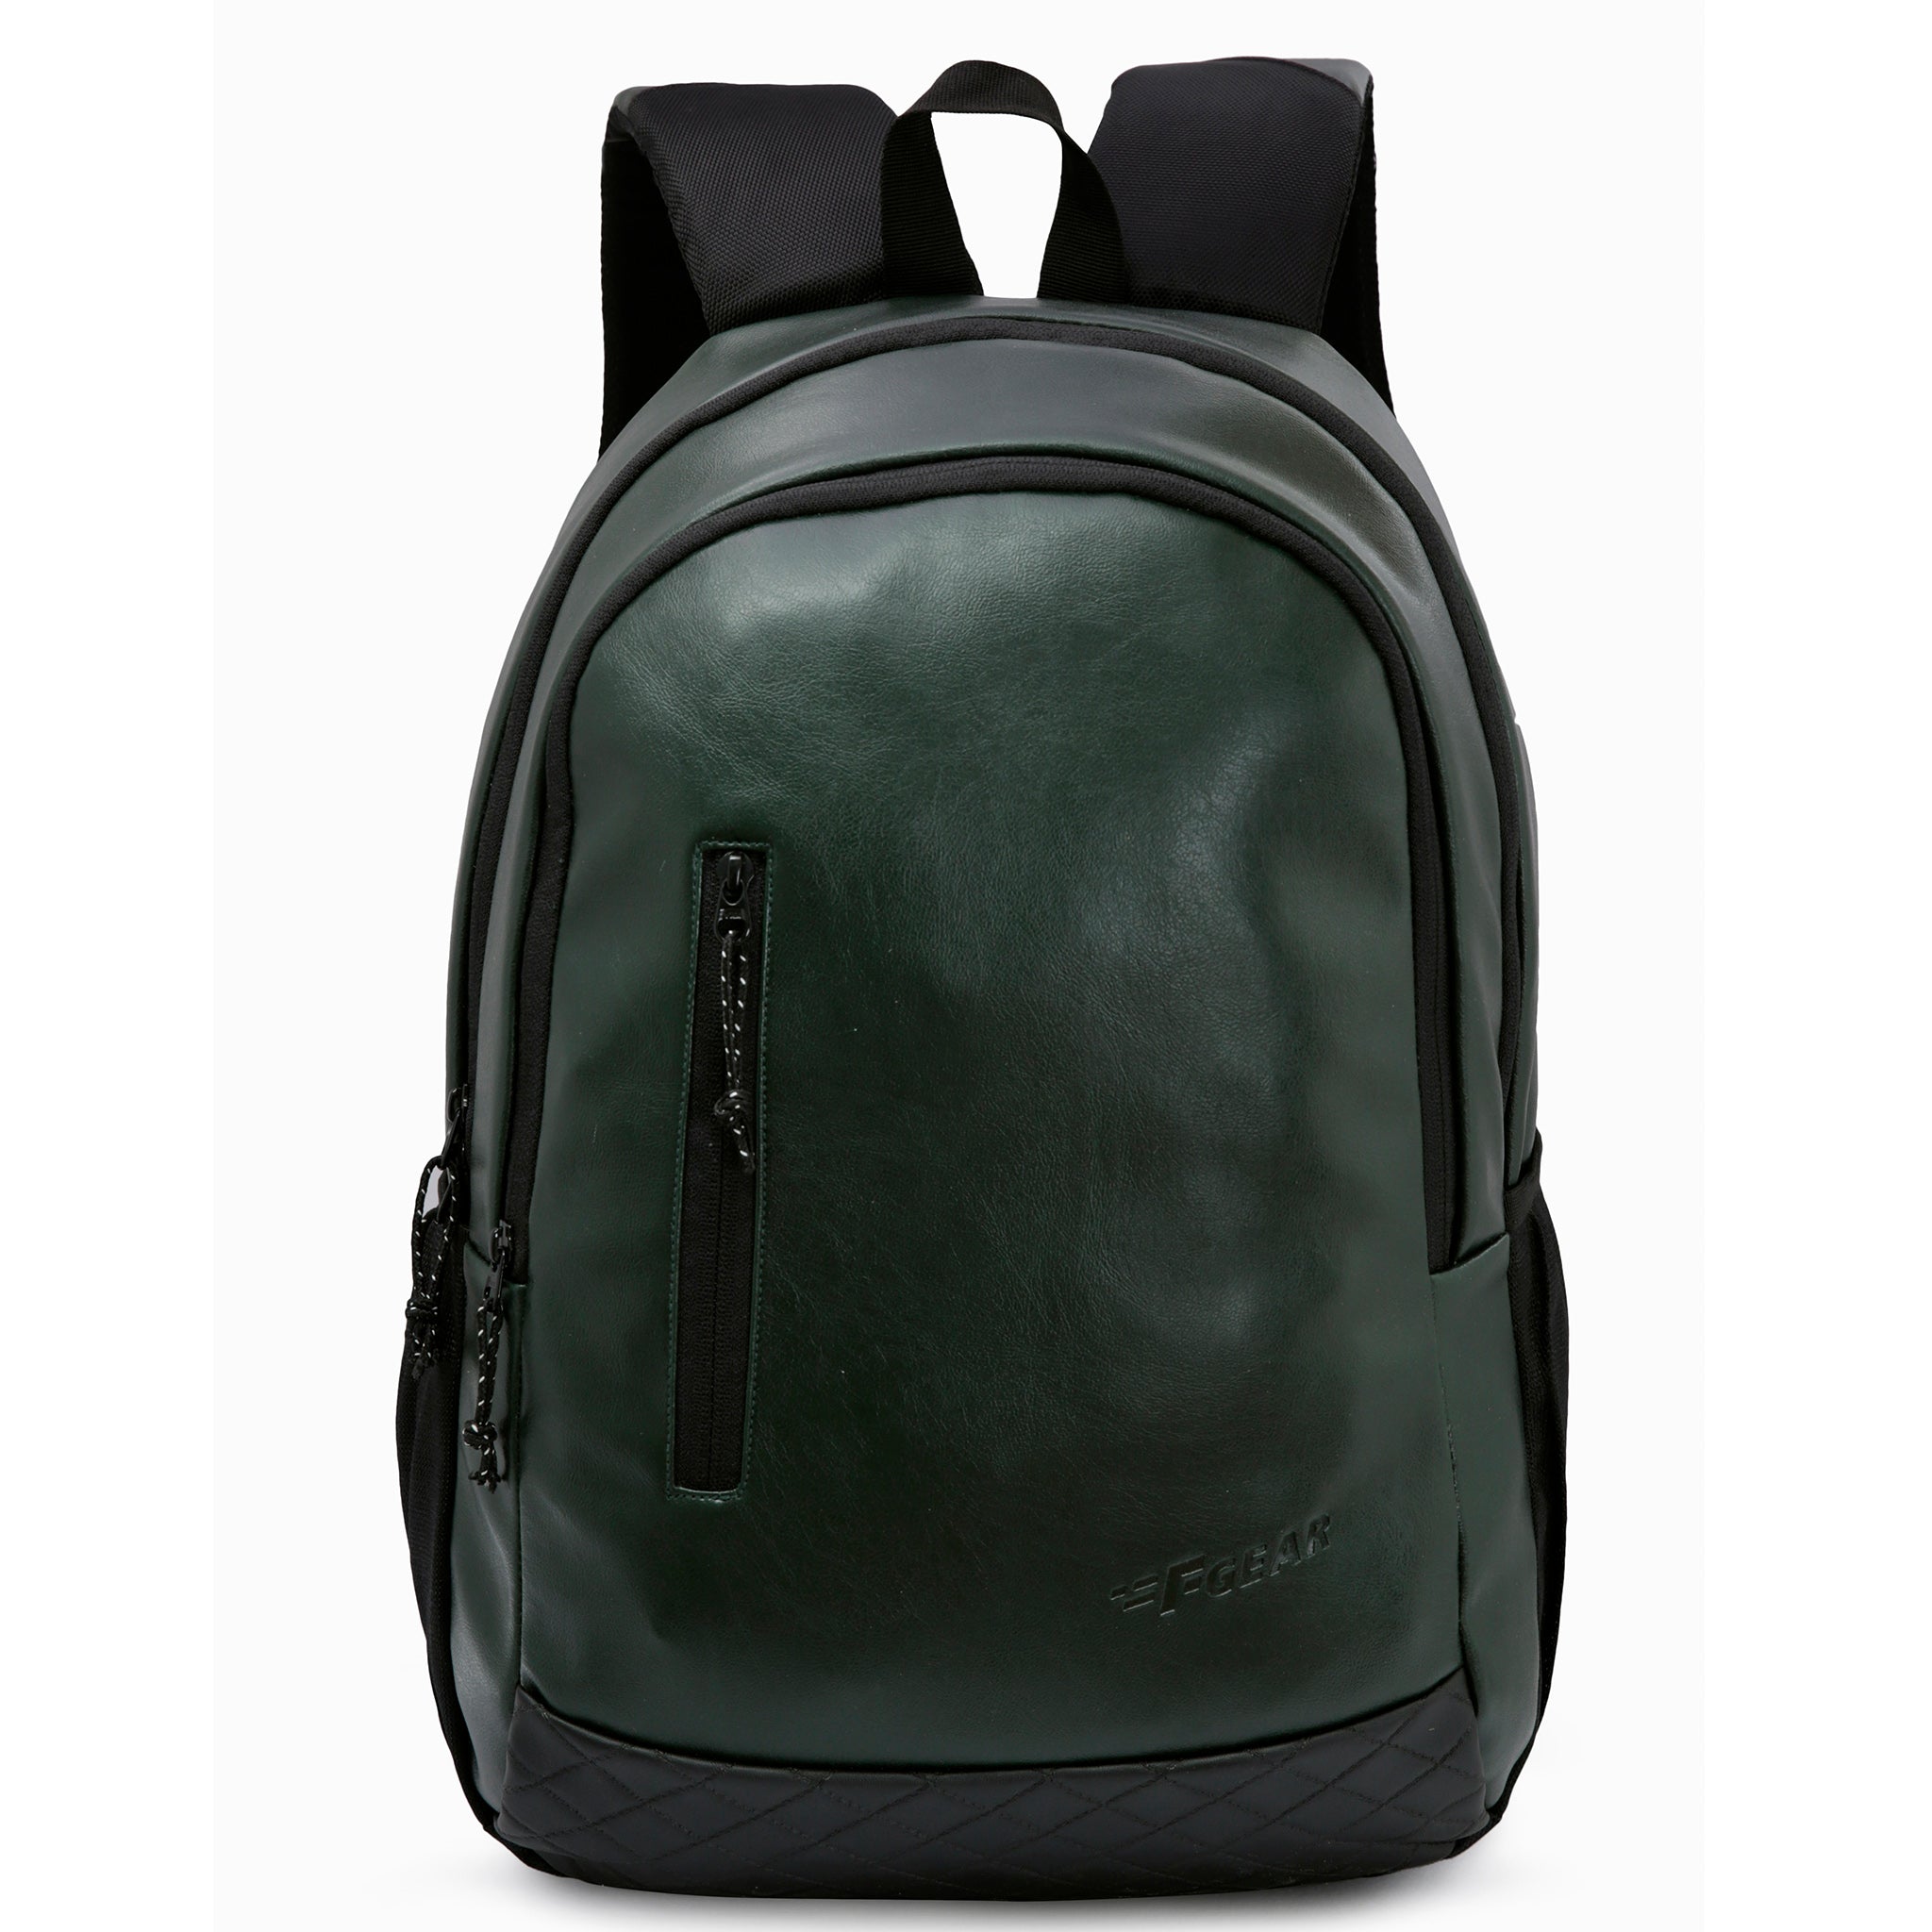 Buy Handcrafted Leather Backpack, Nota in Black With Olive Green Details.  MADE TO ORDER Online in India - Etsy